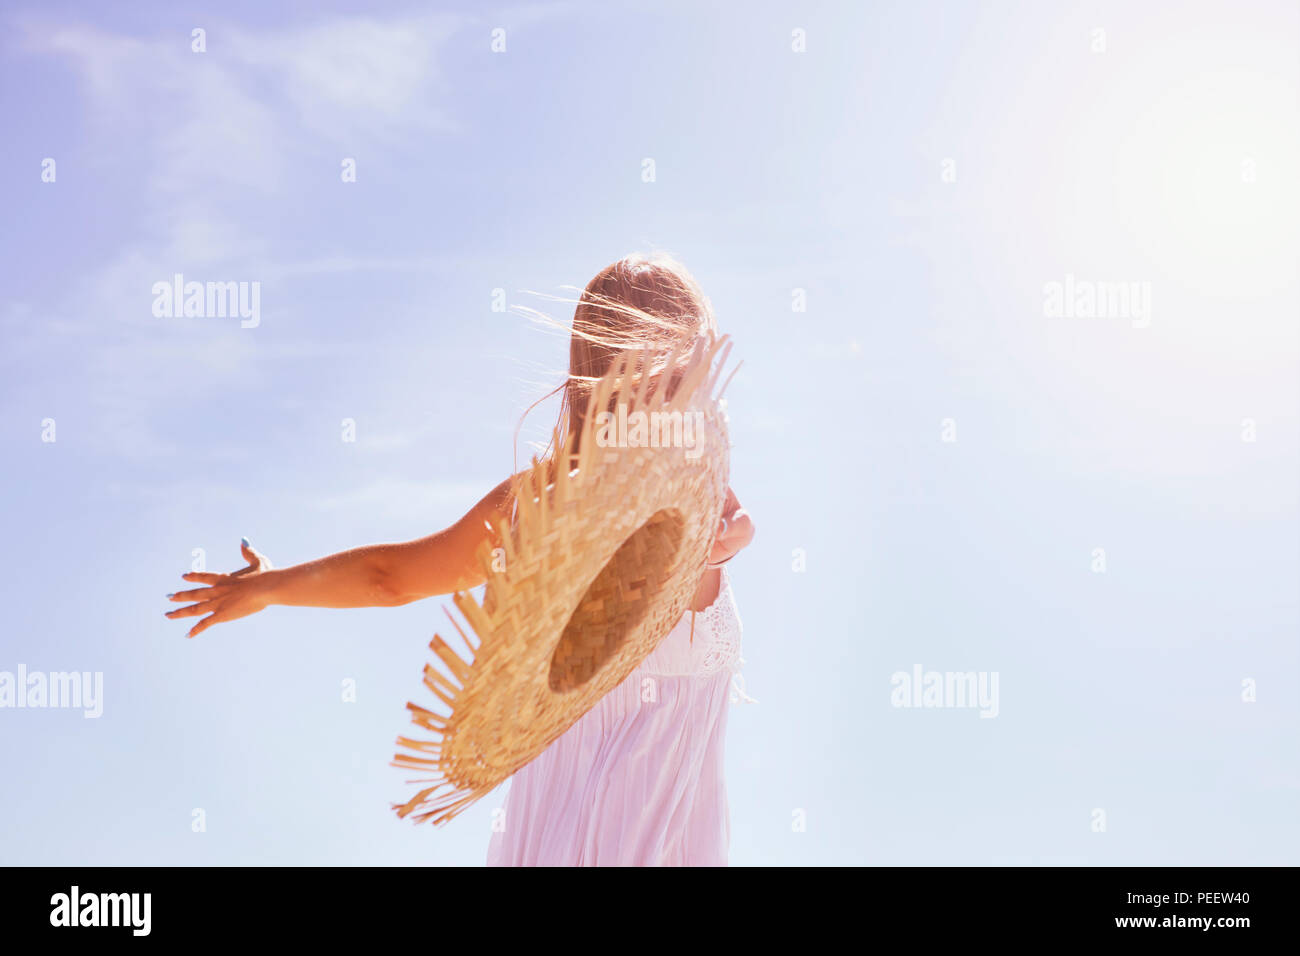 a young woman with long brown hair throws a straw hat in the air Stock Photo